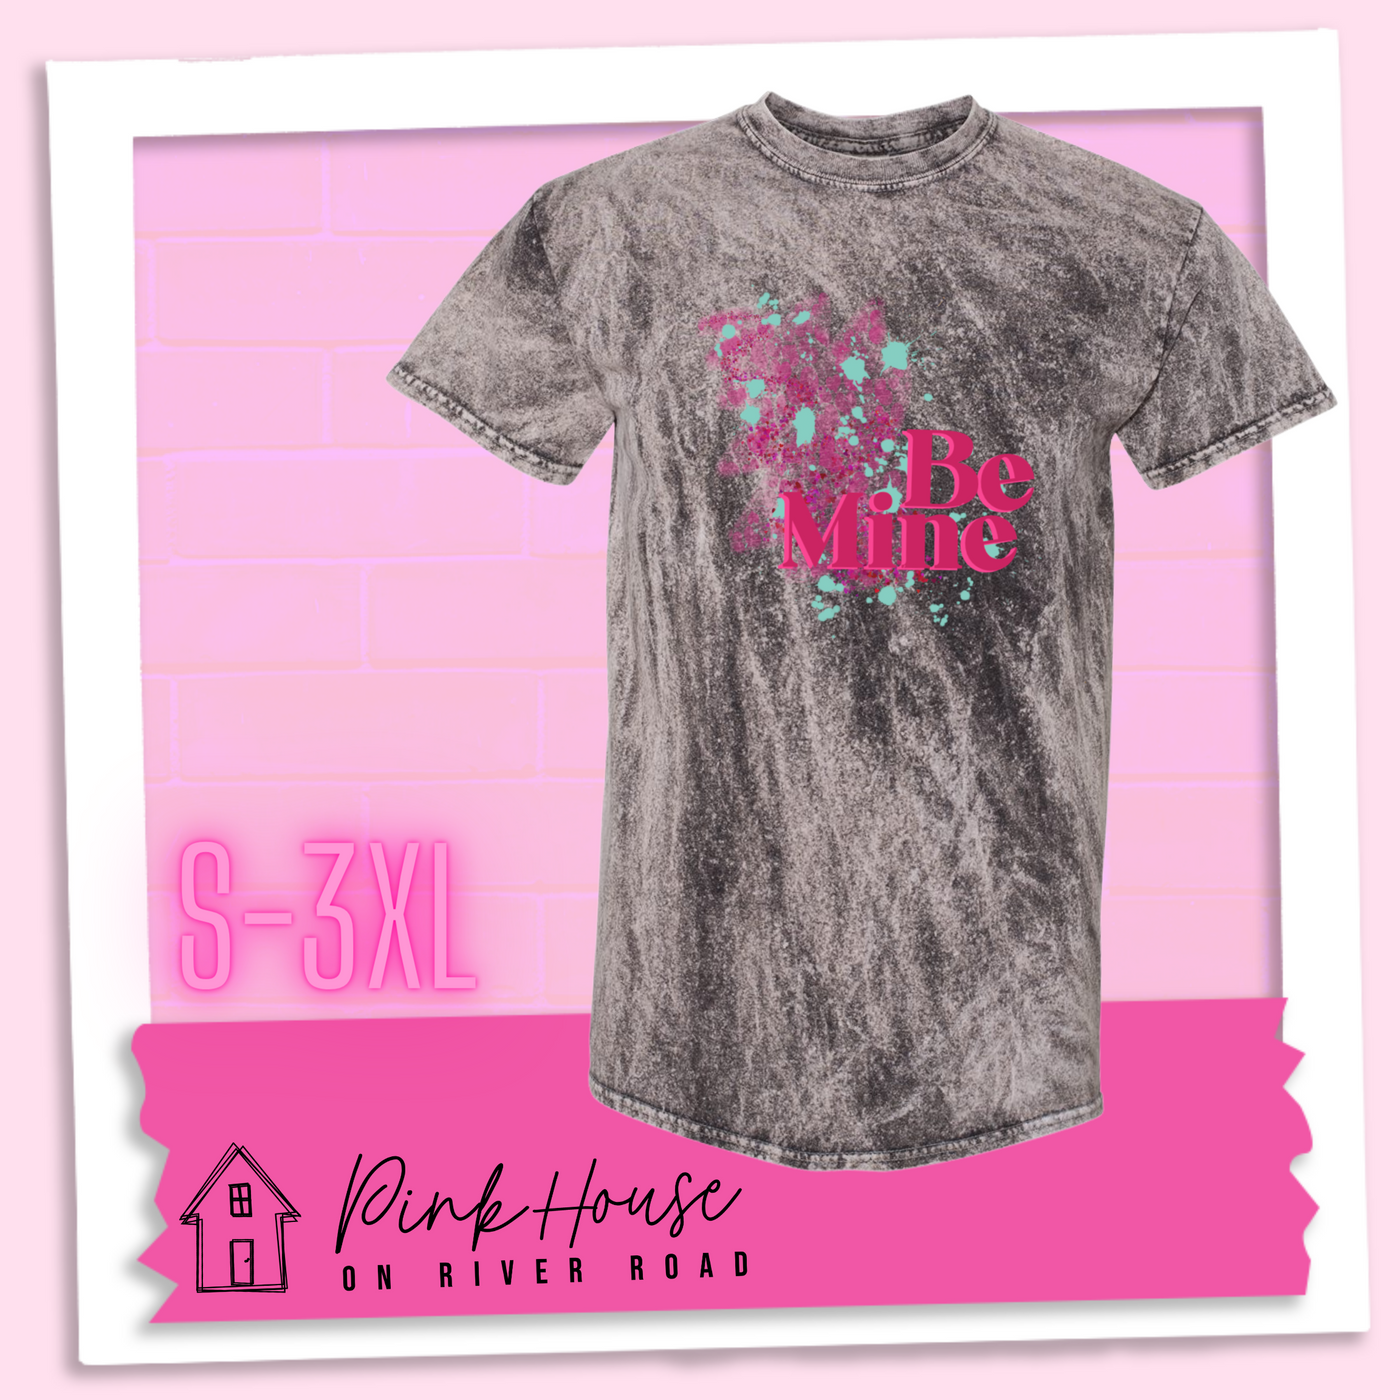 Charcoal Mineral Wash Tee with a squiggle design made of pink hearts and pink sparkles with light teal splatters and pink text at the end of the art that says Be Mine with a hot pink shadow.